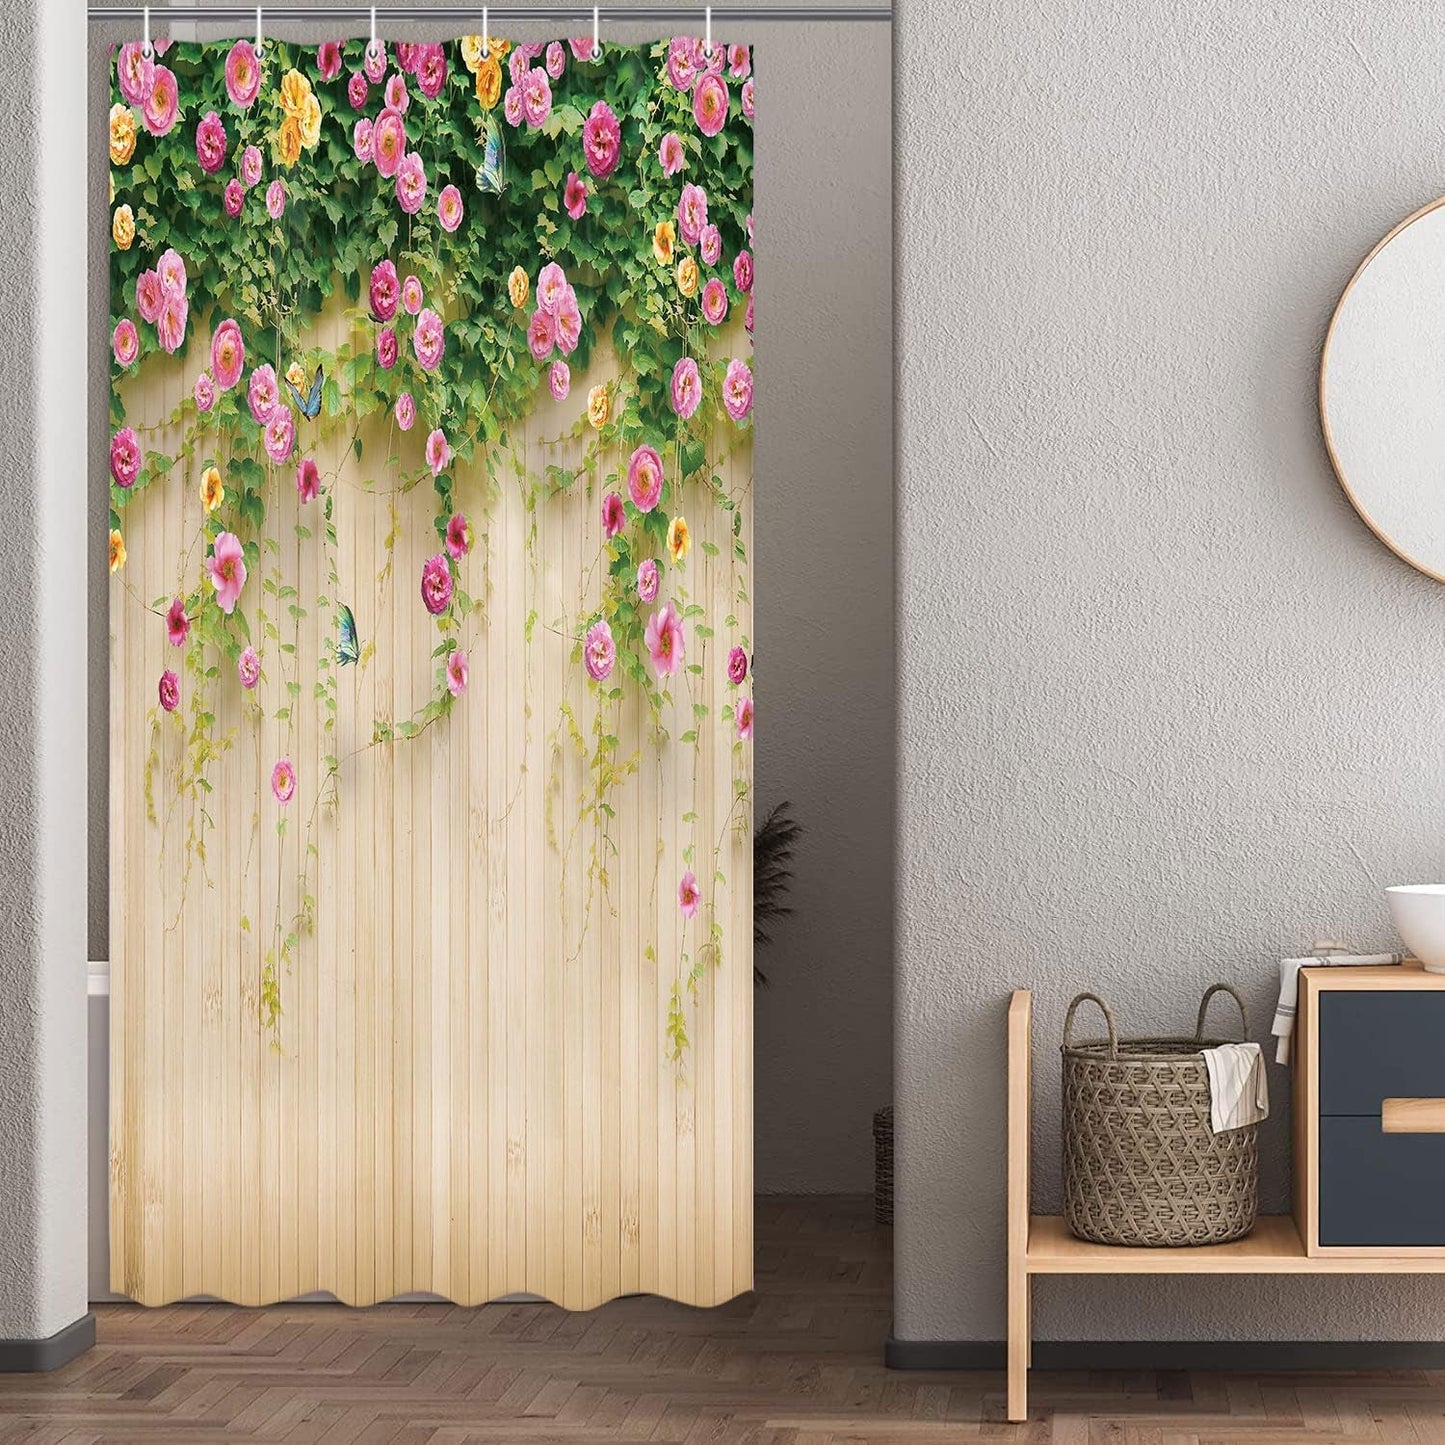 Floral Shower Curtains 3D Rosemary Shower Curtain Flower with Butterfly on Rustic Wooden Background Cute Bath Curtains, Pink Rose Fabric Garden Shower Curtains Pretty Shower Curtain 72X72